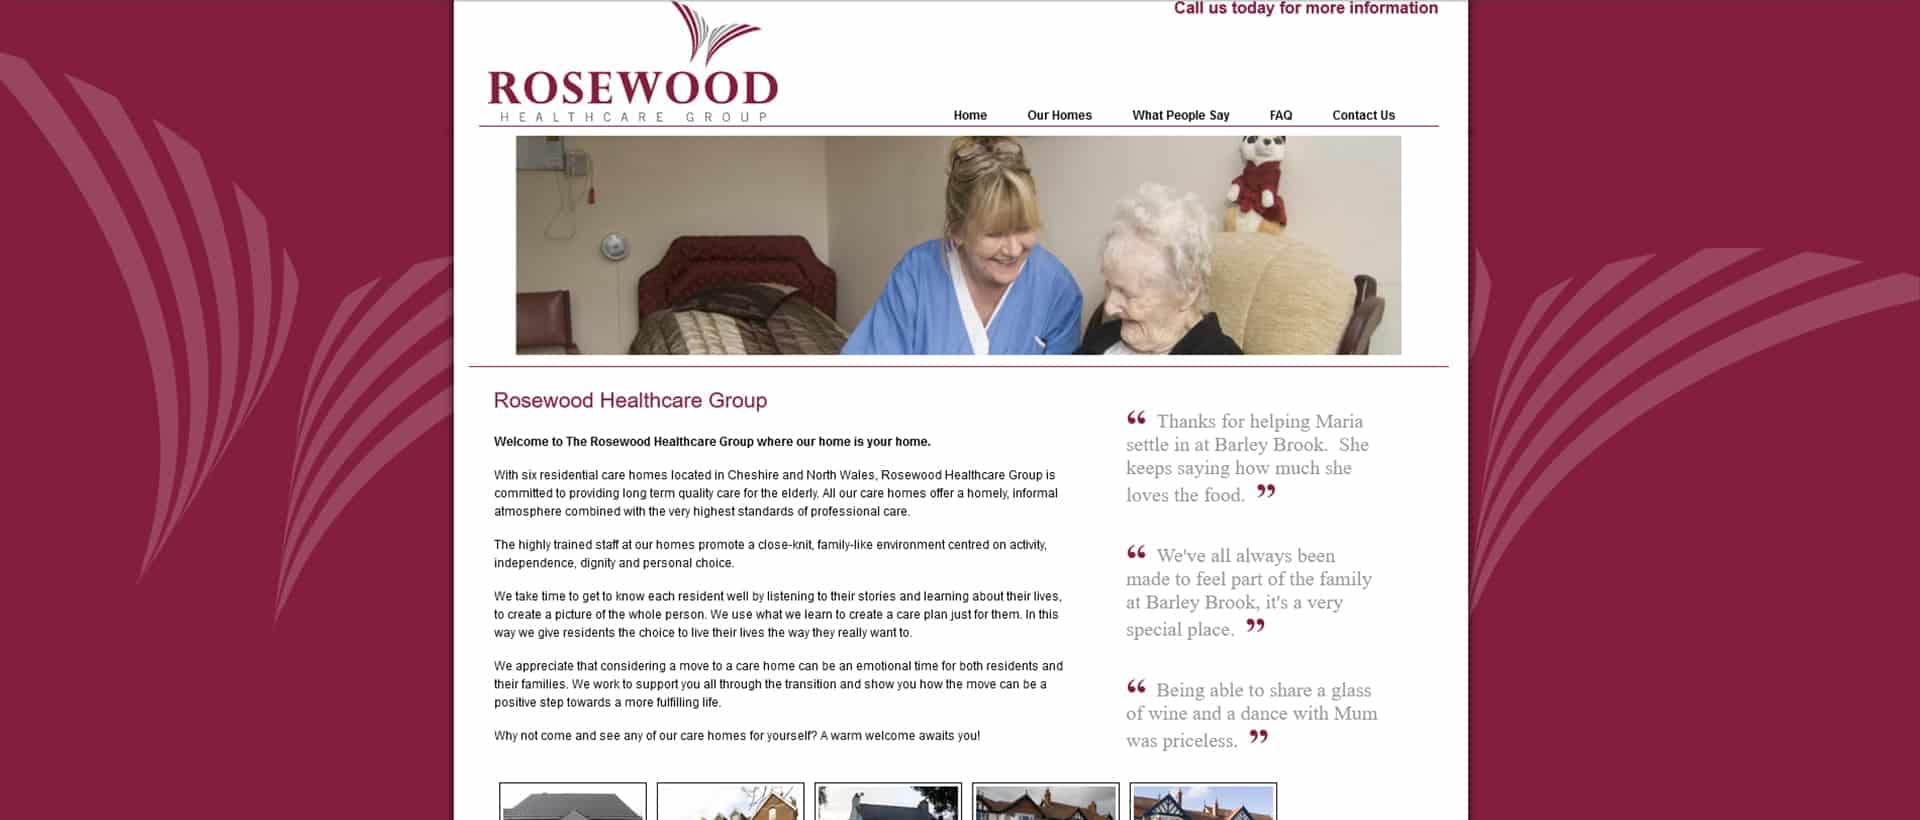 BWS_Rosewood Healthcare Group-Before